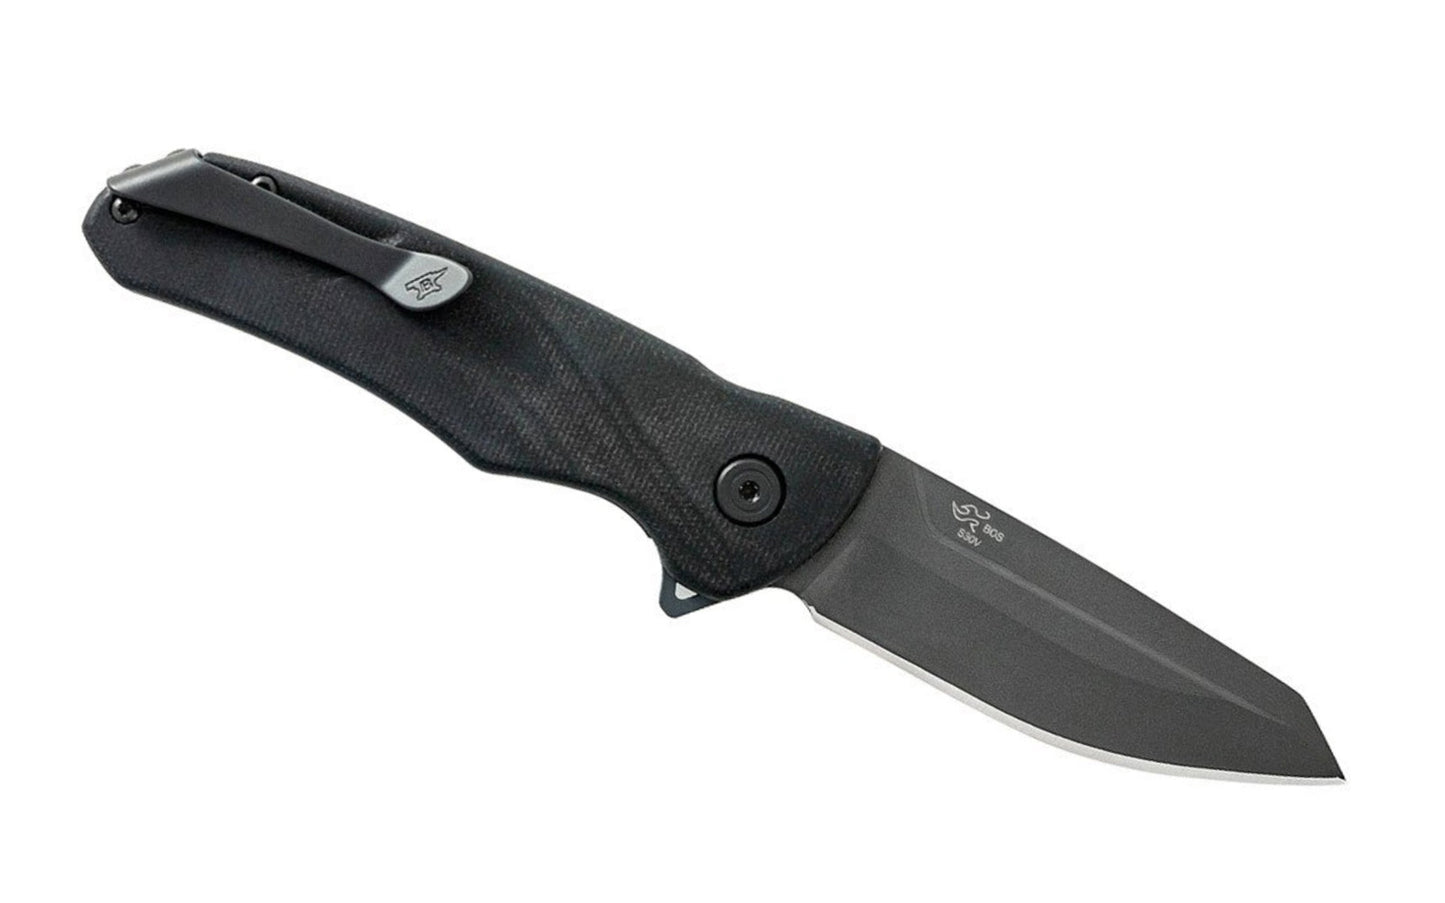 The Buck Knives 843 Sprint OPS Folding Knife has a high speed ball bearing flipper for fast deployment. The reverse tanto blade shape gives gthe knife piercing strength while also giving you the smooth cutting surface of a drop point. The blade is made of S30V steel. Made in USA. Model 0843BKS-B